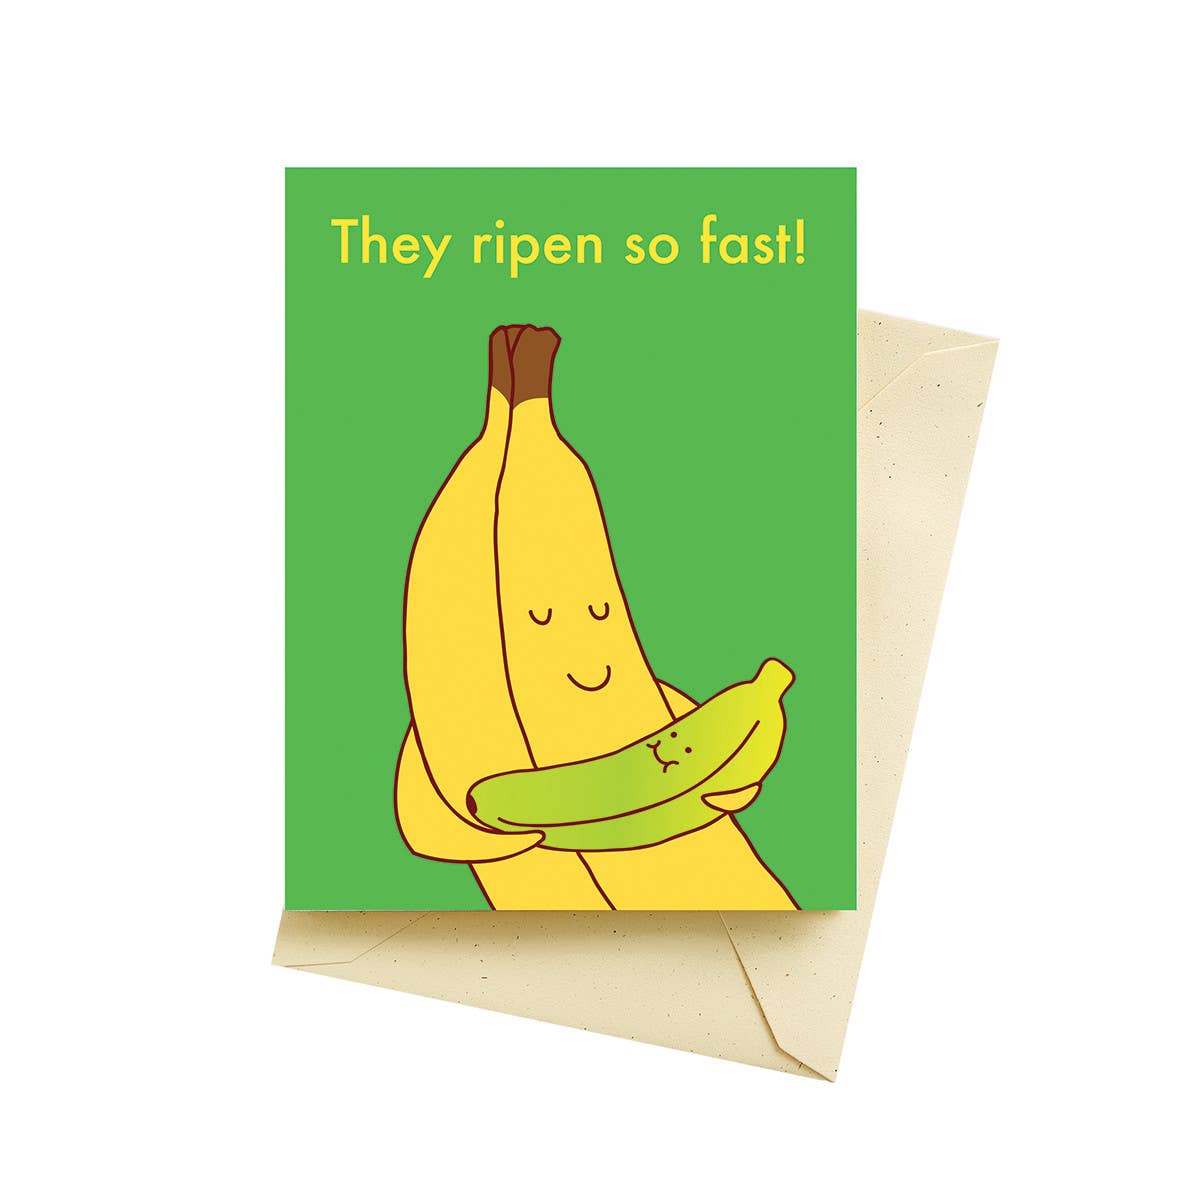 Baby greeting card -- has image of a banana holding a baby banana and reads "They ripen so fast"